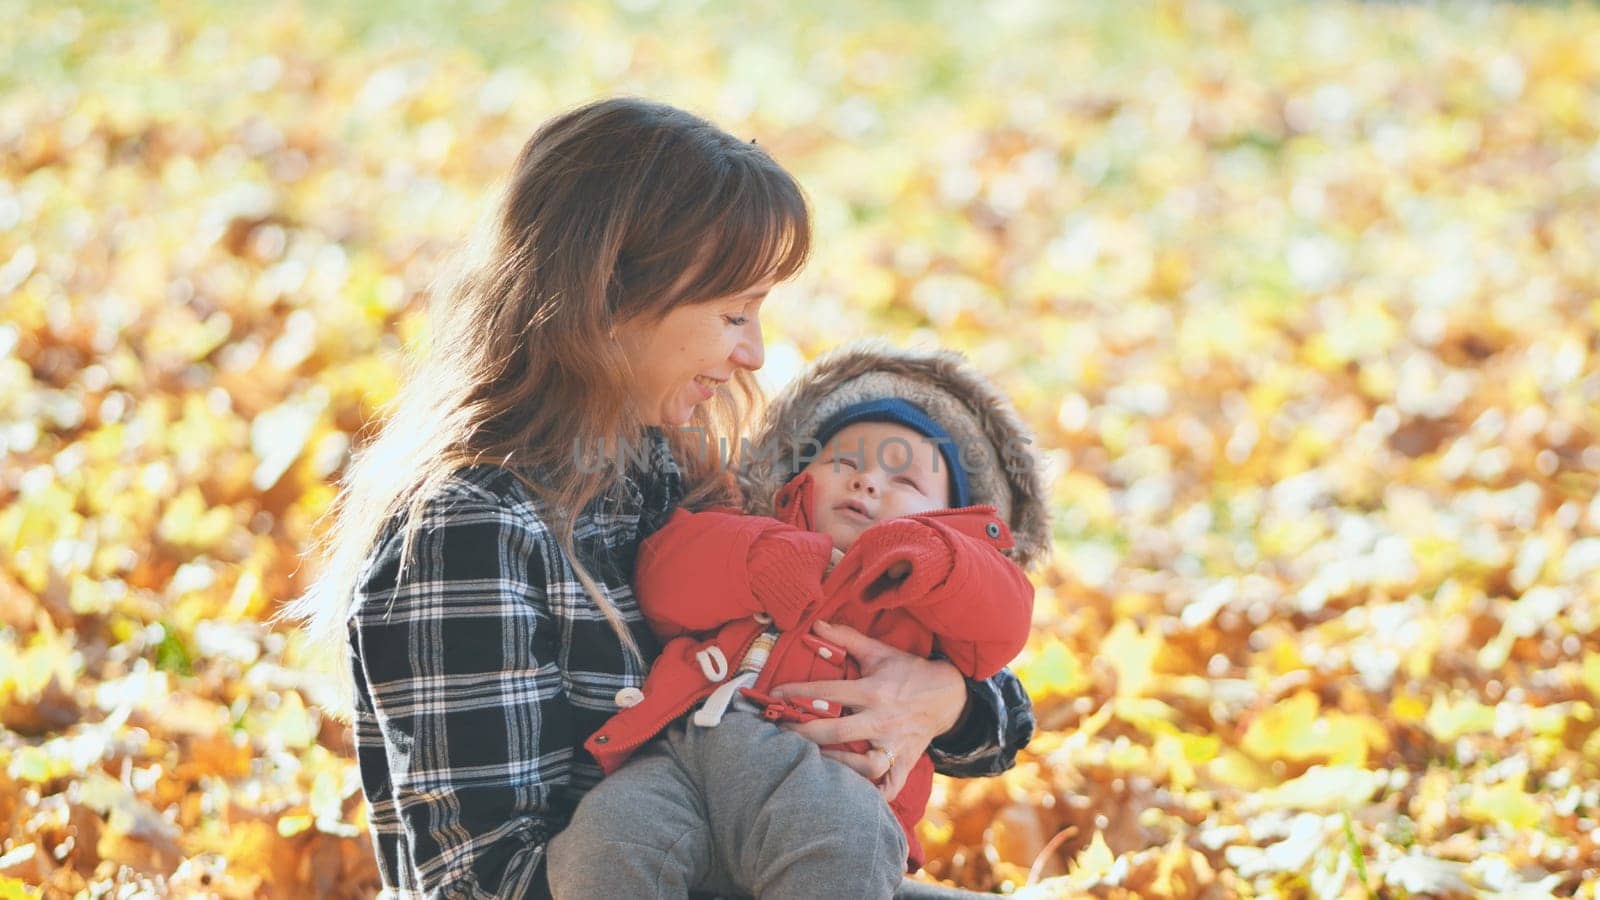 A mother and child in the park in the fall sitting on fallen leaves